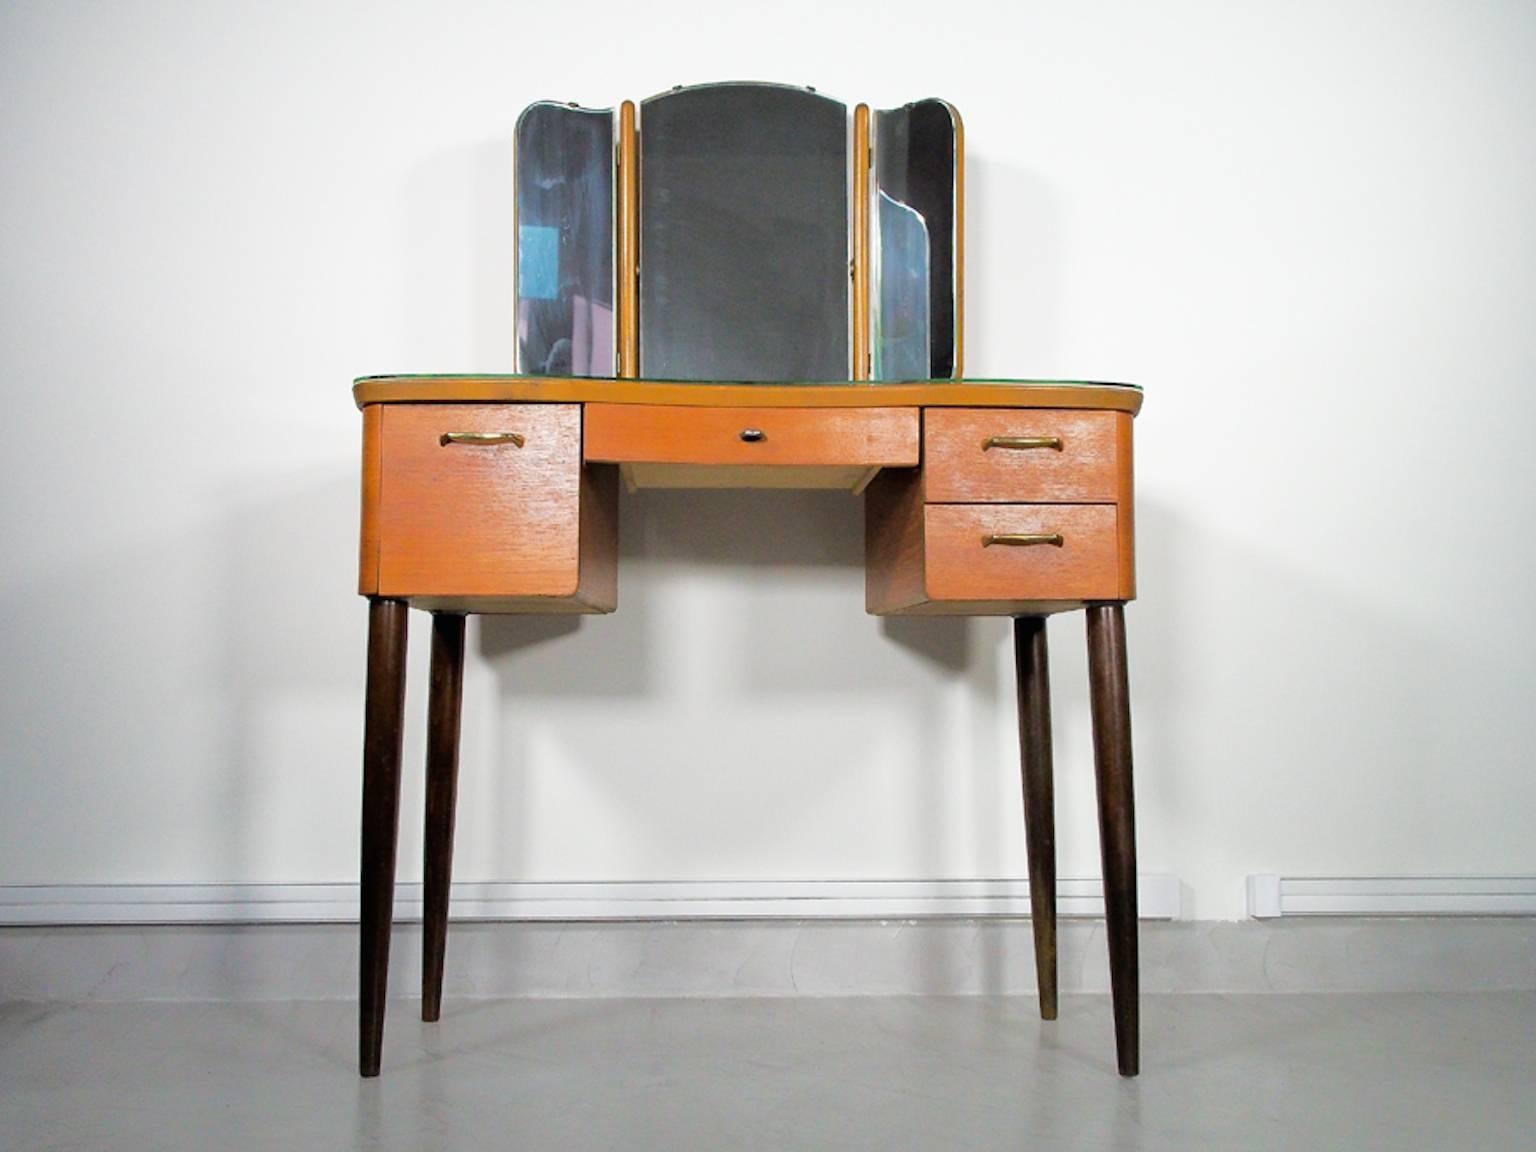 Glass Mid-20th Century Teak Dressing Table with Angled Mirror